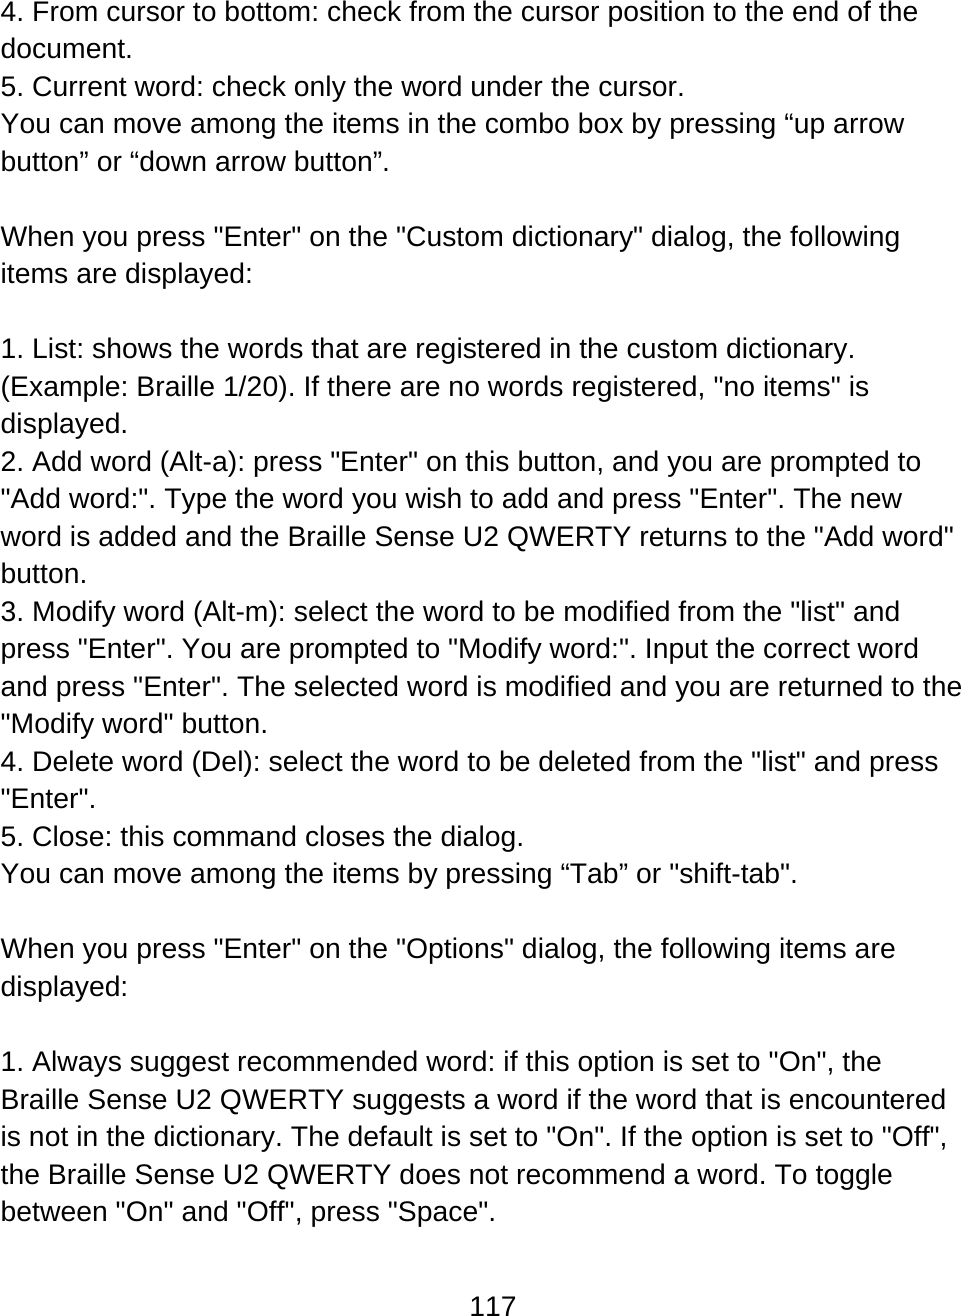 117  4. From cursor to bottom: check from the cursor position to the end of the document. 5. Current word: check only the word under the cursor.  You can move among the items in the combo box by pressing “up arrow button” or “down arrow button”.  When you press &quot;Enter&quot; on the &quot;Custom dictionary&quot; dialog, the following items are displayed:  1. List: shows the words that are registered in the custom dictionary. (Example: Braille 1/20). If there are no words registered, &quot;no items&quot; is displayed. 2. Add word (Alt-a): press &quot;Enter&quot; on this button, and you are prompted to &quot;Add word:&quot;. Type the word you wish to add and press &quot;Enter&quot;. The new word is added and the Braille Sense U2 QWERTY returns to the &quot;Add word&quot; button. 3. Modify word (Alt-m): select the word to be modified from the &quot;list&quot; and press &quot;Enter&quot;. You are prompted to &quot;Modify word:&quot;. Input the correct word and press &quot;Enter&quot;. The selected word is modified and you are returned to the &quot;Modify word&quot; button. 4. Delete word (Del): select the word to be deleted from the &quot;list&quot; and press &quot;Enter&quot;. 5. Close: this command closes the dialog.  You can move among the items by pressing “Tab” or &quot;shift-tab&quot;.  When you press &quot;Enter&quot; on the &quot;Options&quot; dialog, the following items are displayed:  1. Always suggest recommended word: if this option is set to &quot;On&quot;, the Braille Sense U2 QWERTY suggests a word if the word that is encountered is not in the dictionary. The default is set to &quot;On&quot;. If the option is set to &quot;Off&quot;, the Braille Sense U2 QWERTY does not recommend a word. To toggle between &quot;On&quot; and &quot;Off&quot;, press &quot;Space&quot;. 